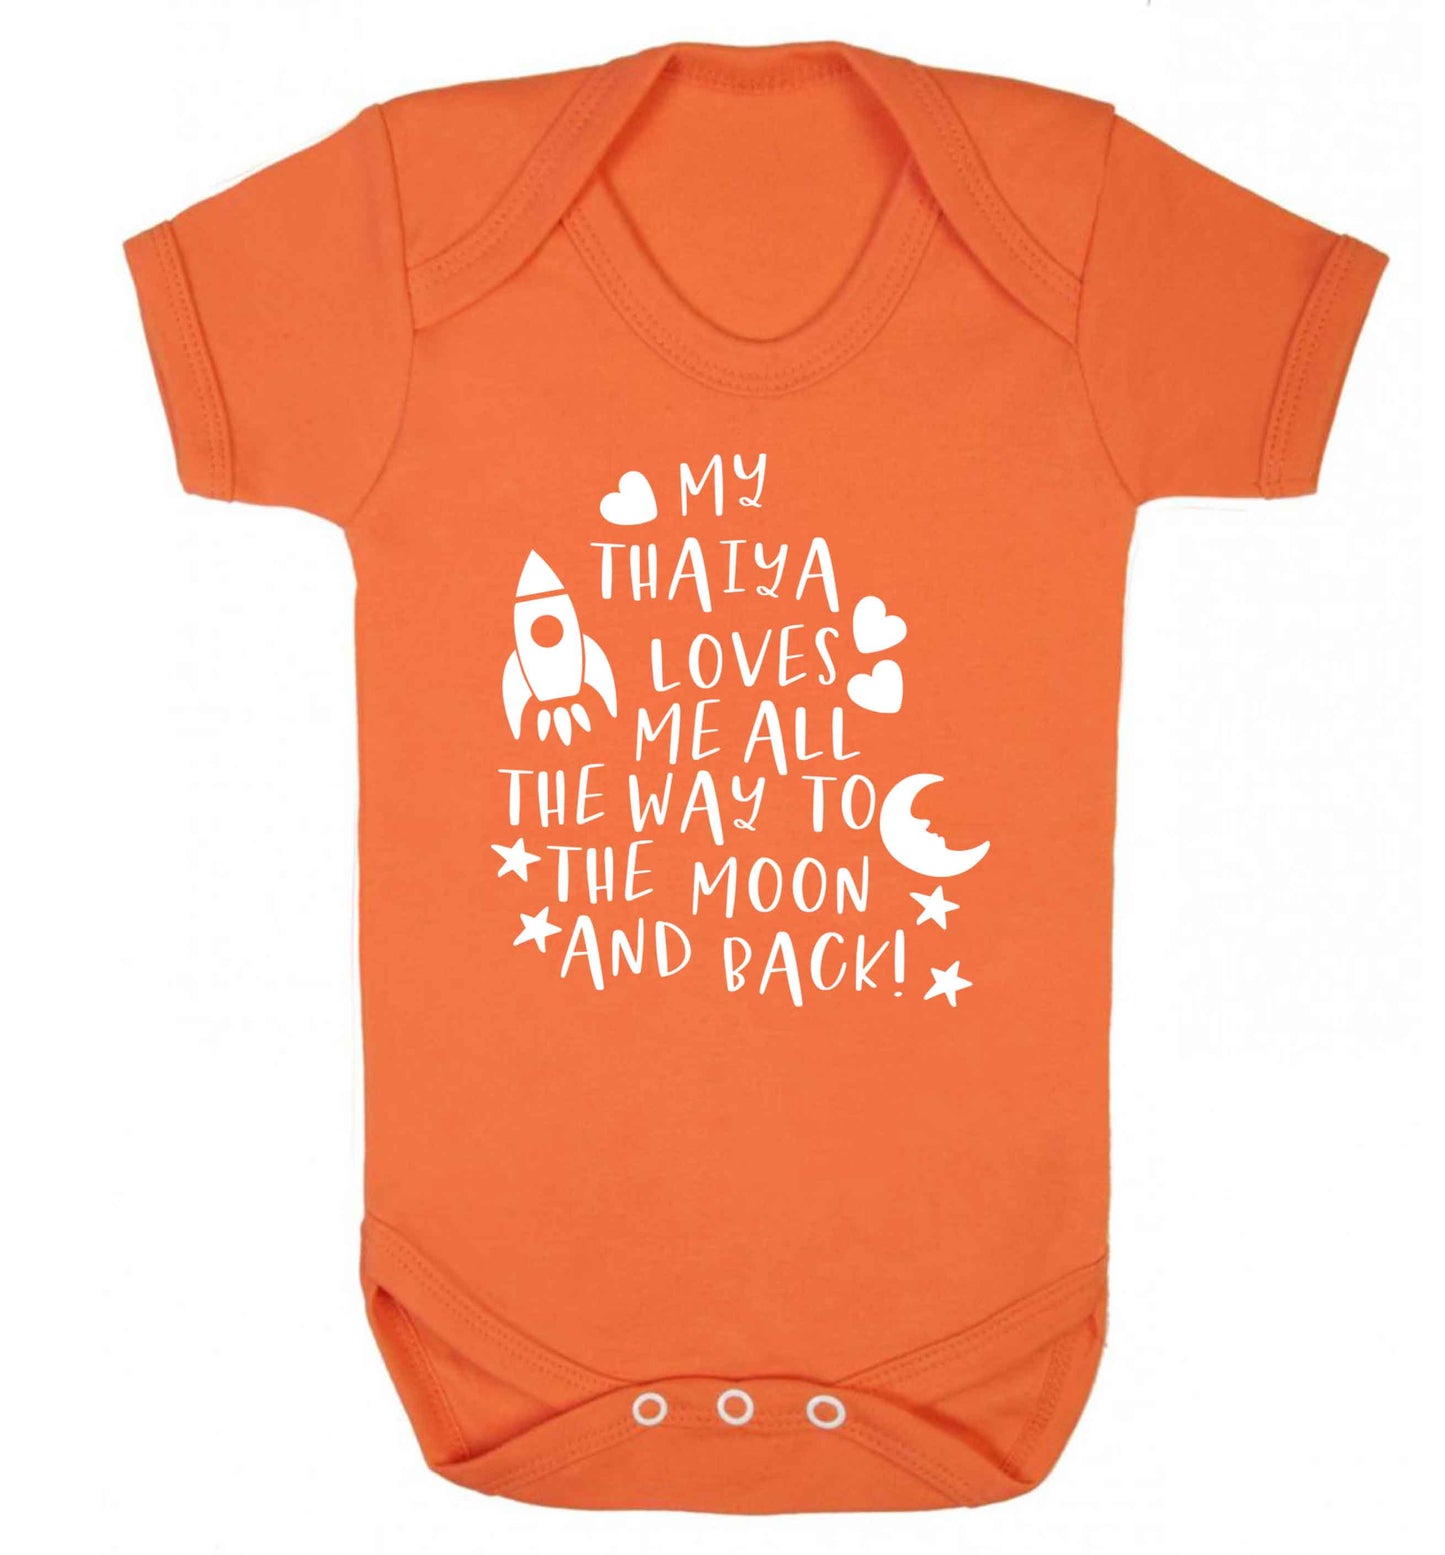 My thaiya loves me all the way to the moon and back Baby Vest orange 18-24 months